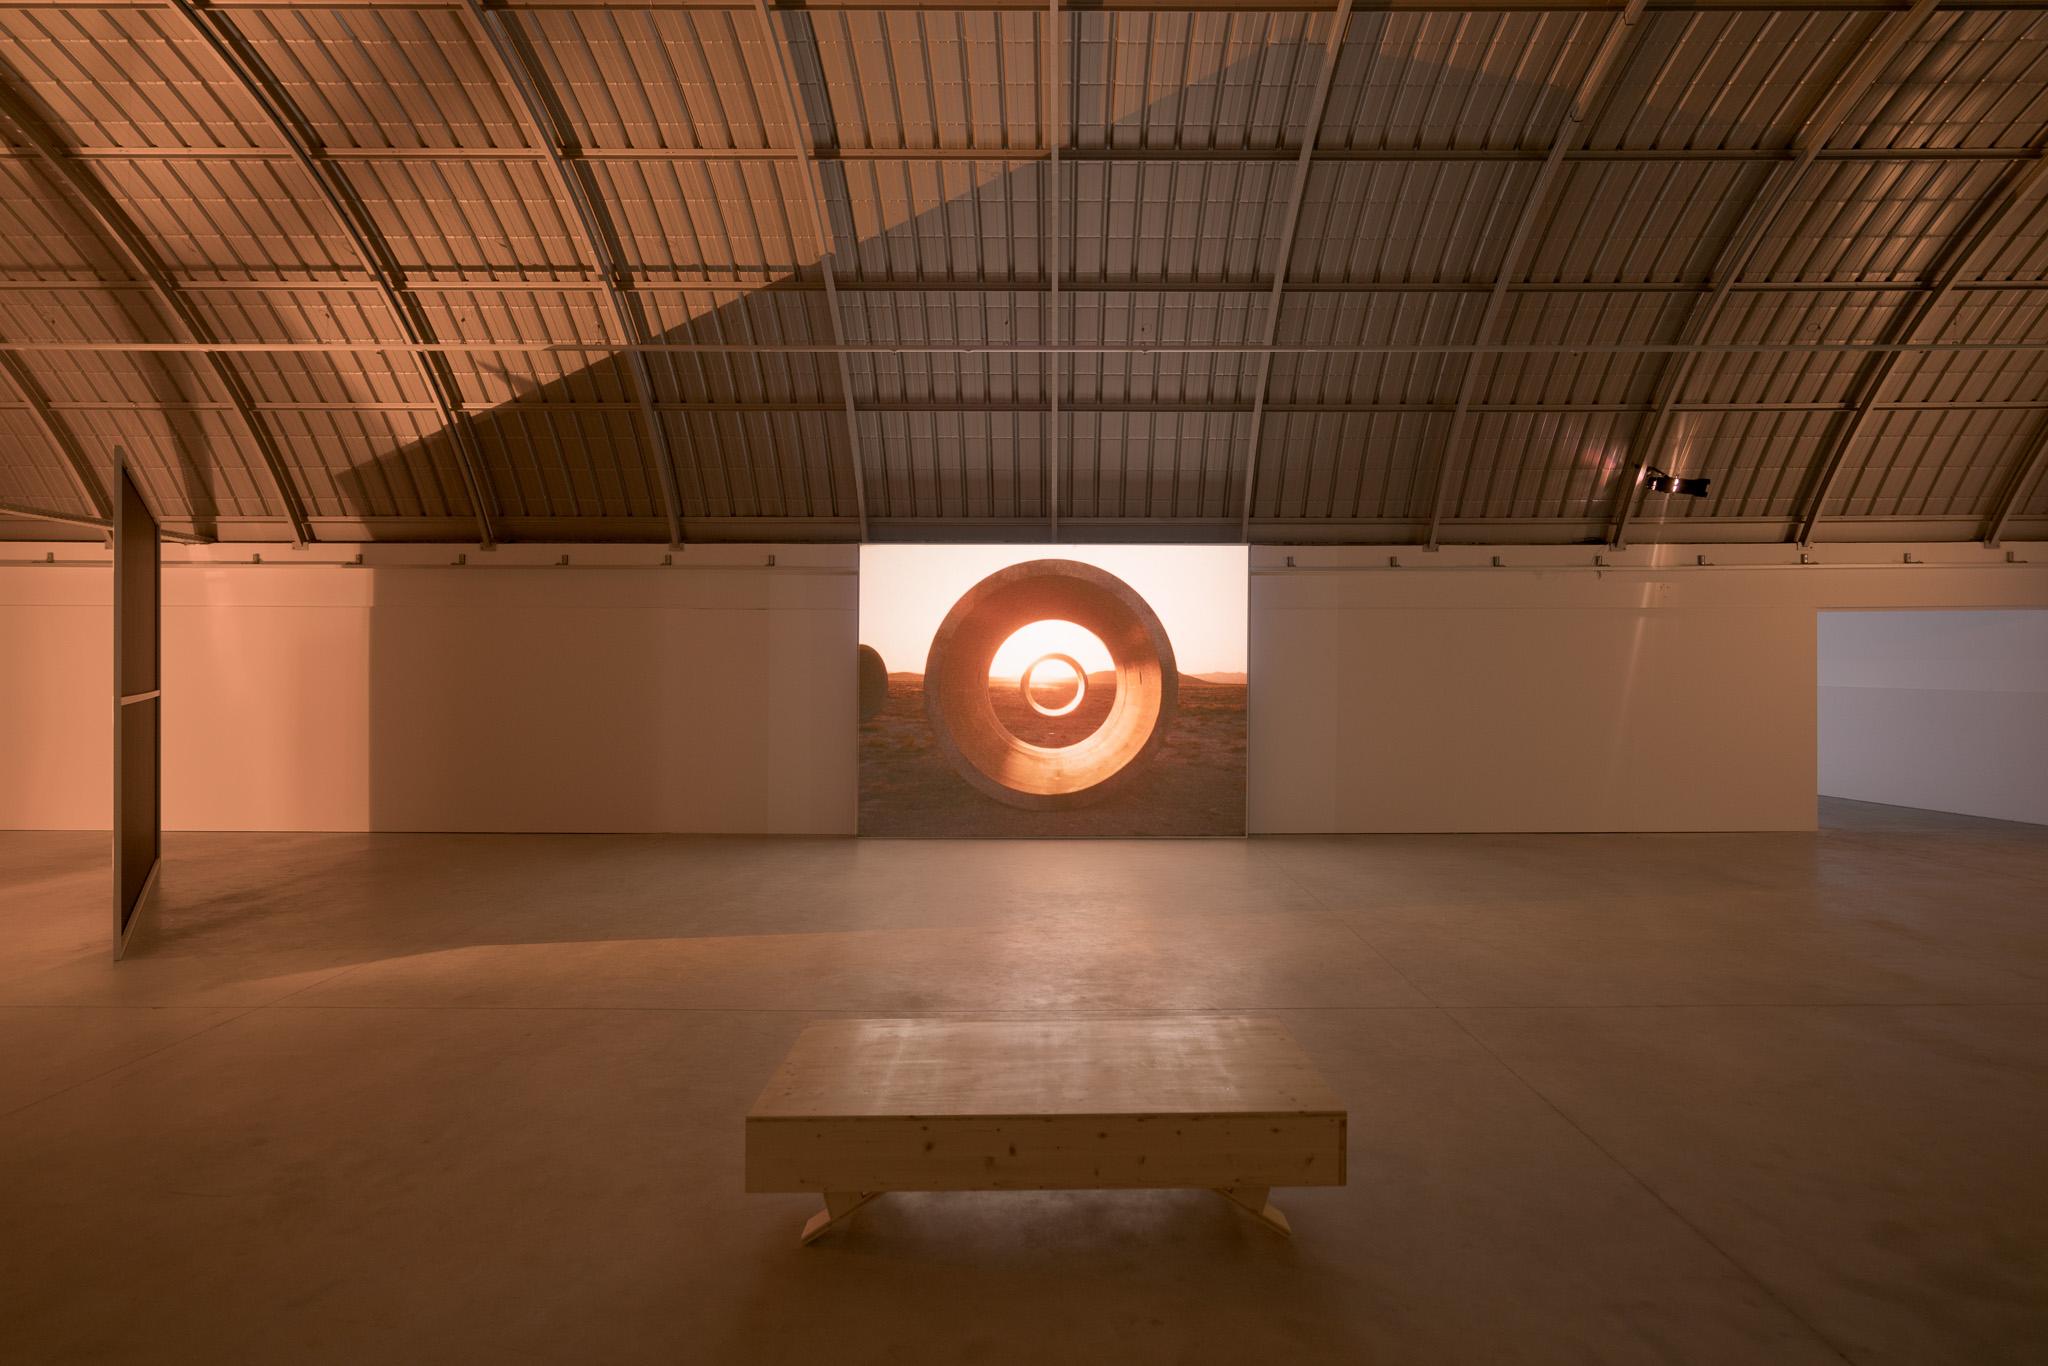 An installation view of Nancy Holt's Sun Tunnels film on display at Centro de Arte Oliva in Portugal